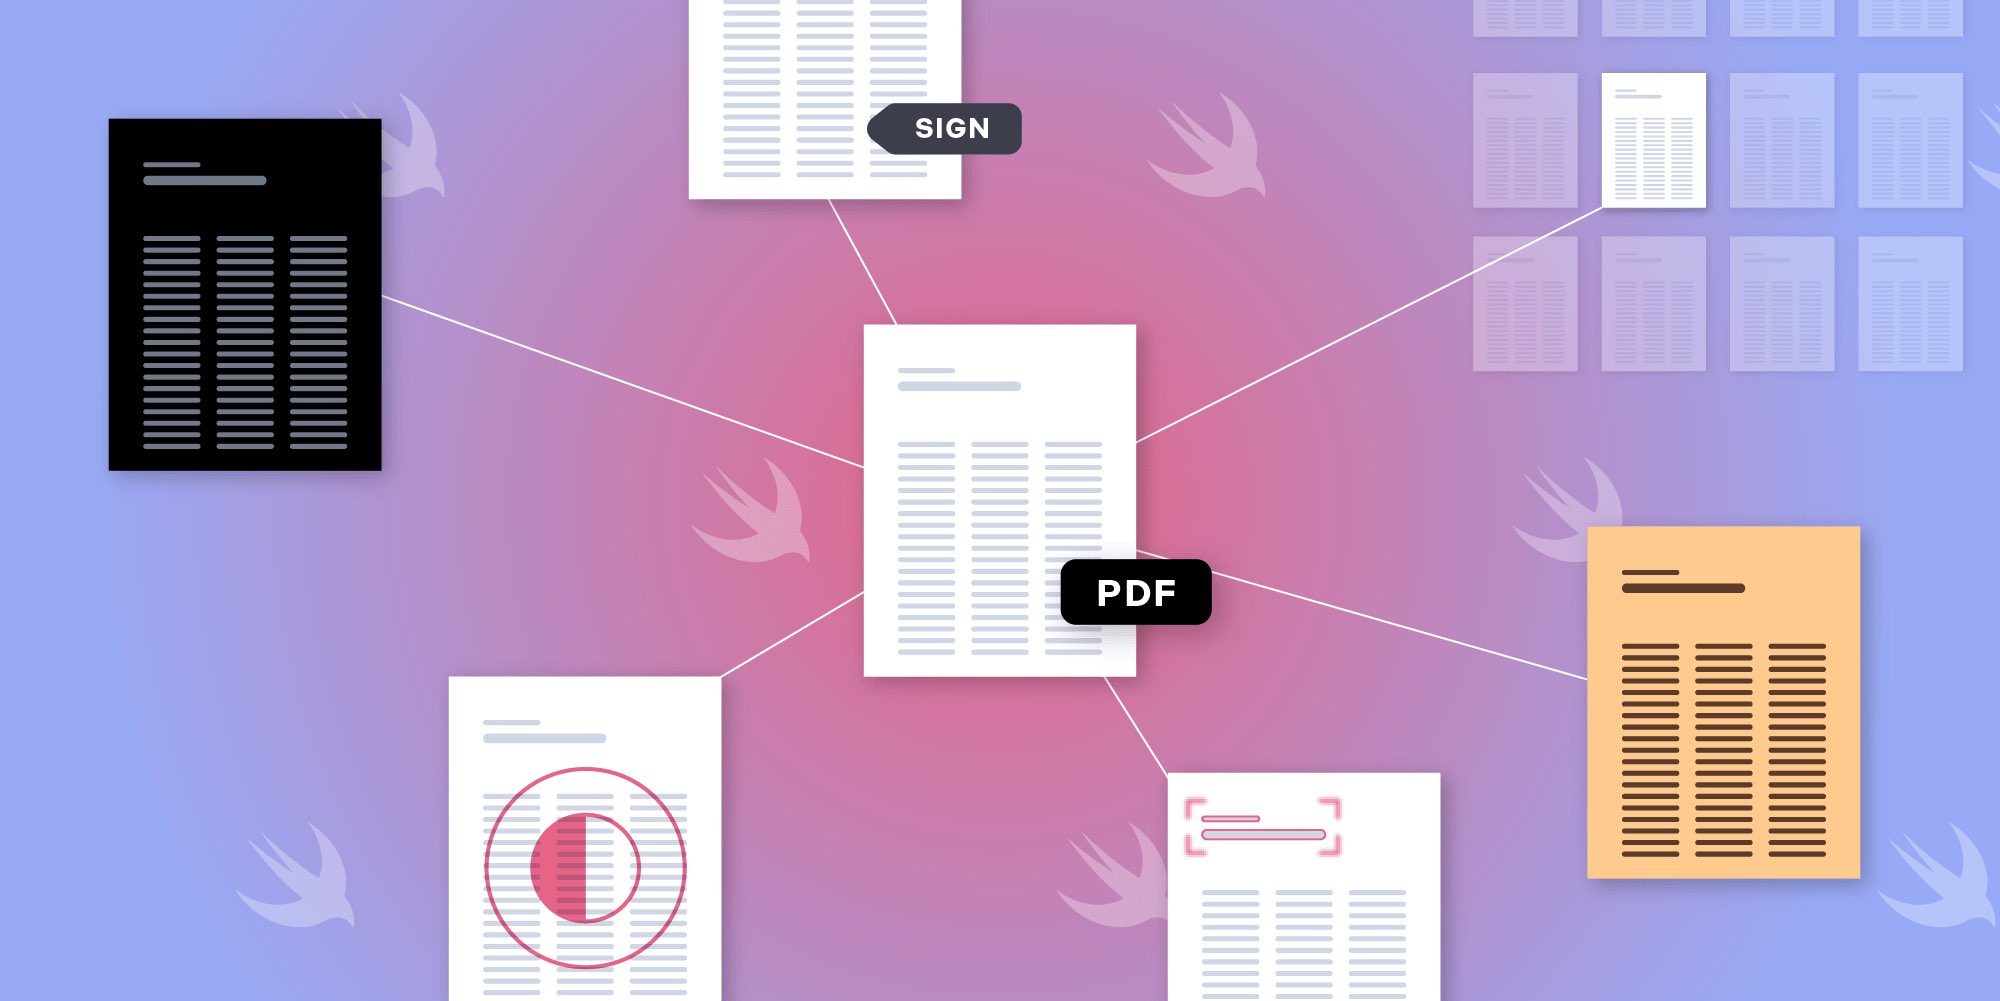 Illustration: Convert a PDF to an Image in Swift